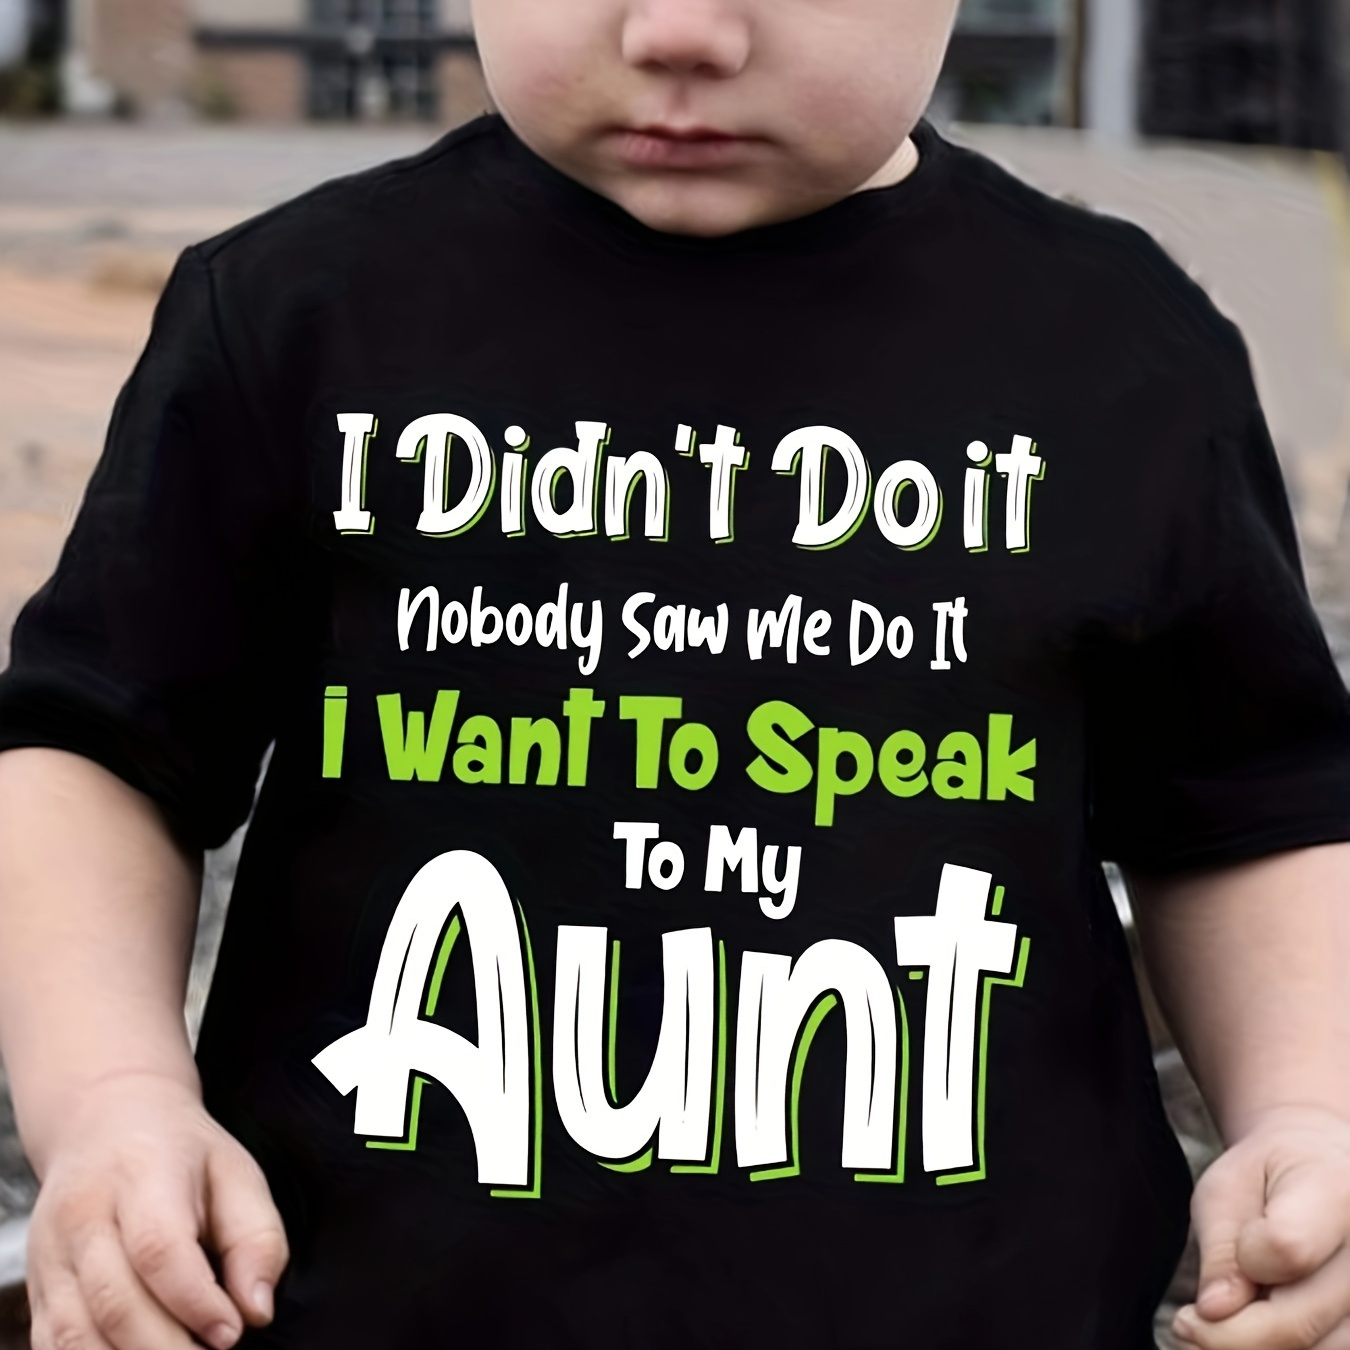 

I Want To Speak To My Aunt Print Tee, Boys' Casual & Trendy Crew Neck Short Sleeve T-shirt For Spring & Summer, Boys' Clothes For Outdoor Activities